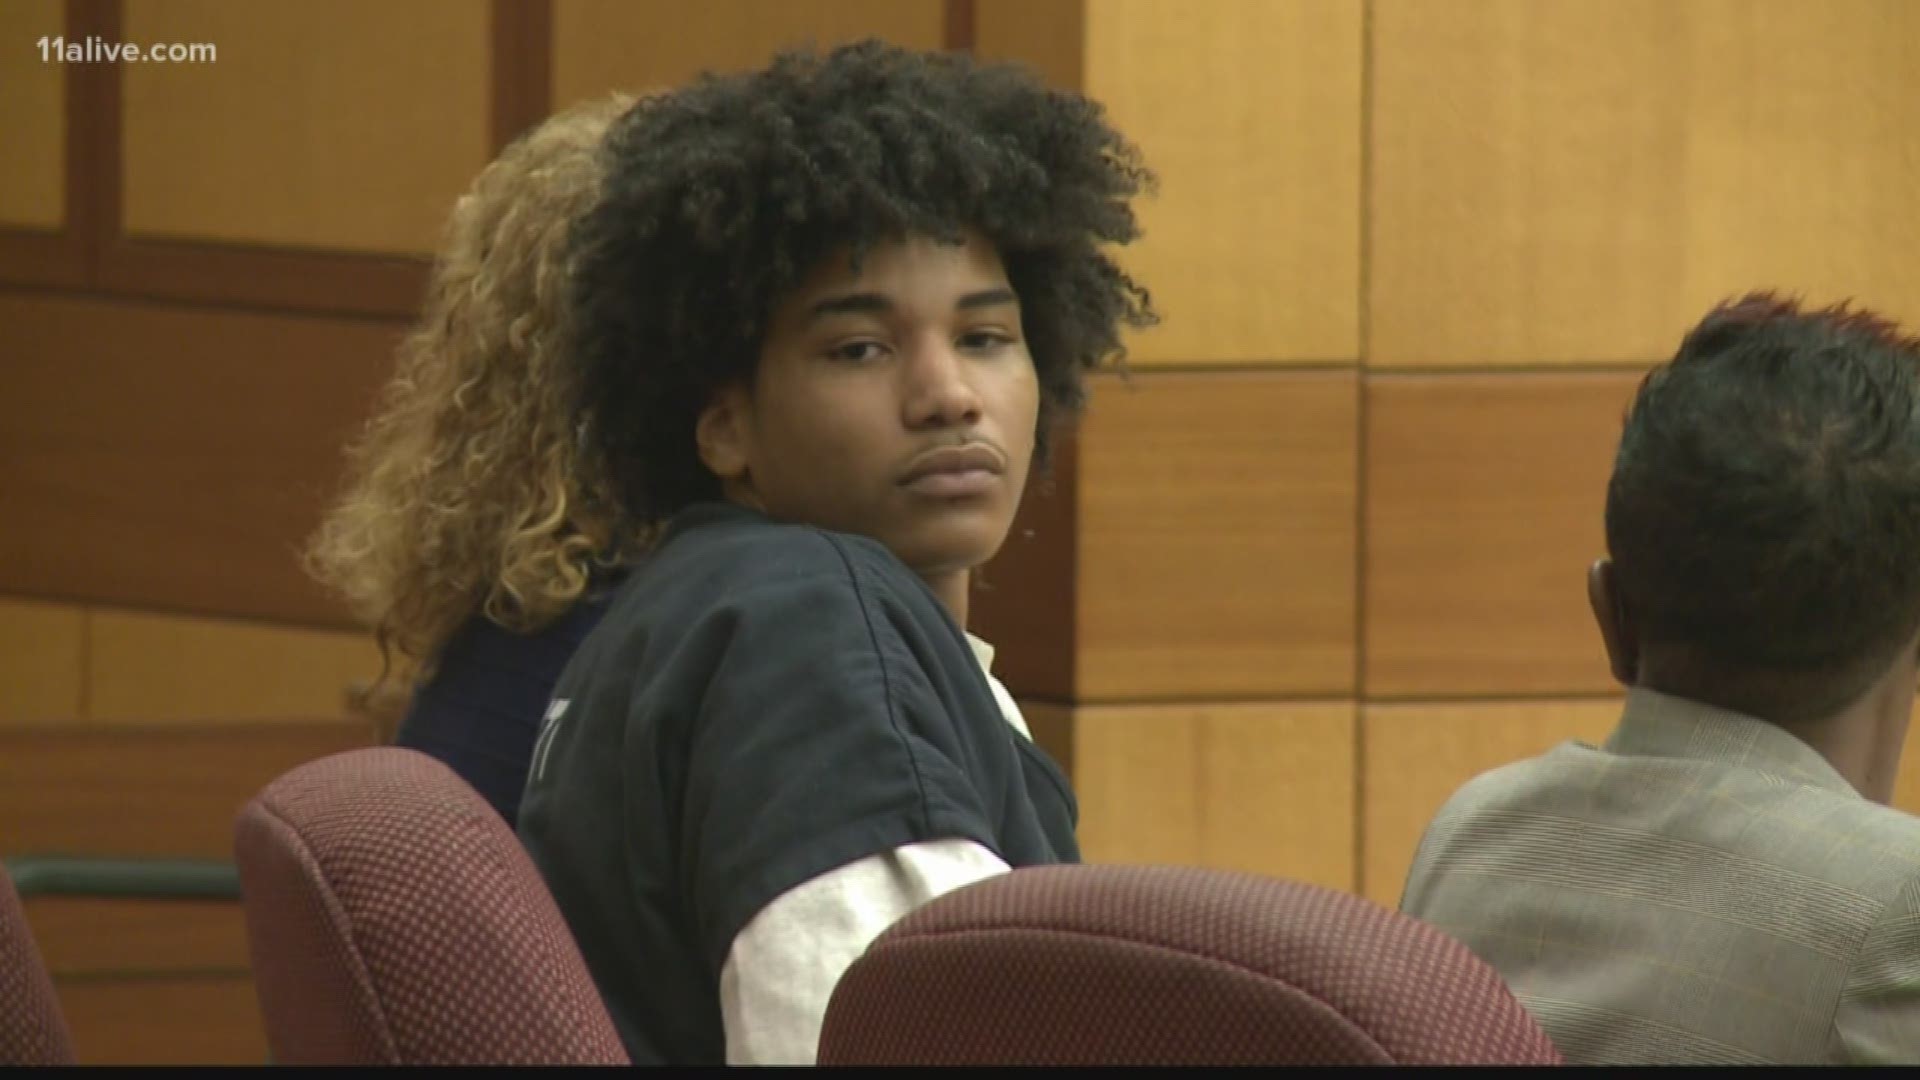 An Atlanta Police detective testified in a preliminary hearing for Barron Barron Brantley, one of the accused killers of the Clark Atlanta student.